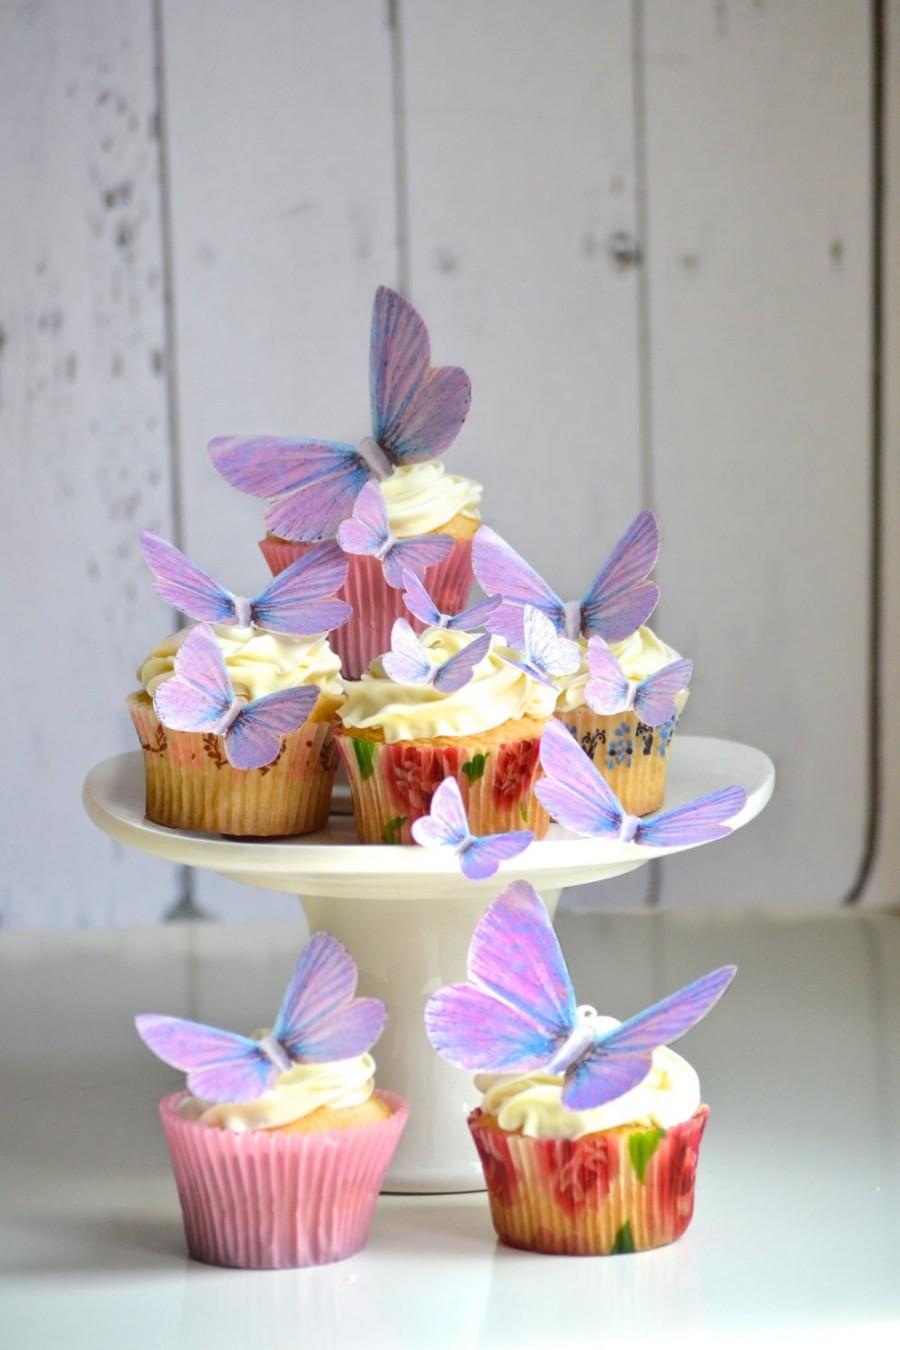 Wedding - Wedding Cake Topper Edible Butterflies in Lavender - Cake & Cupcake toppers - Food decorations - Edible Wedding Favor